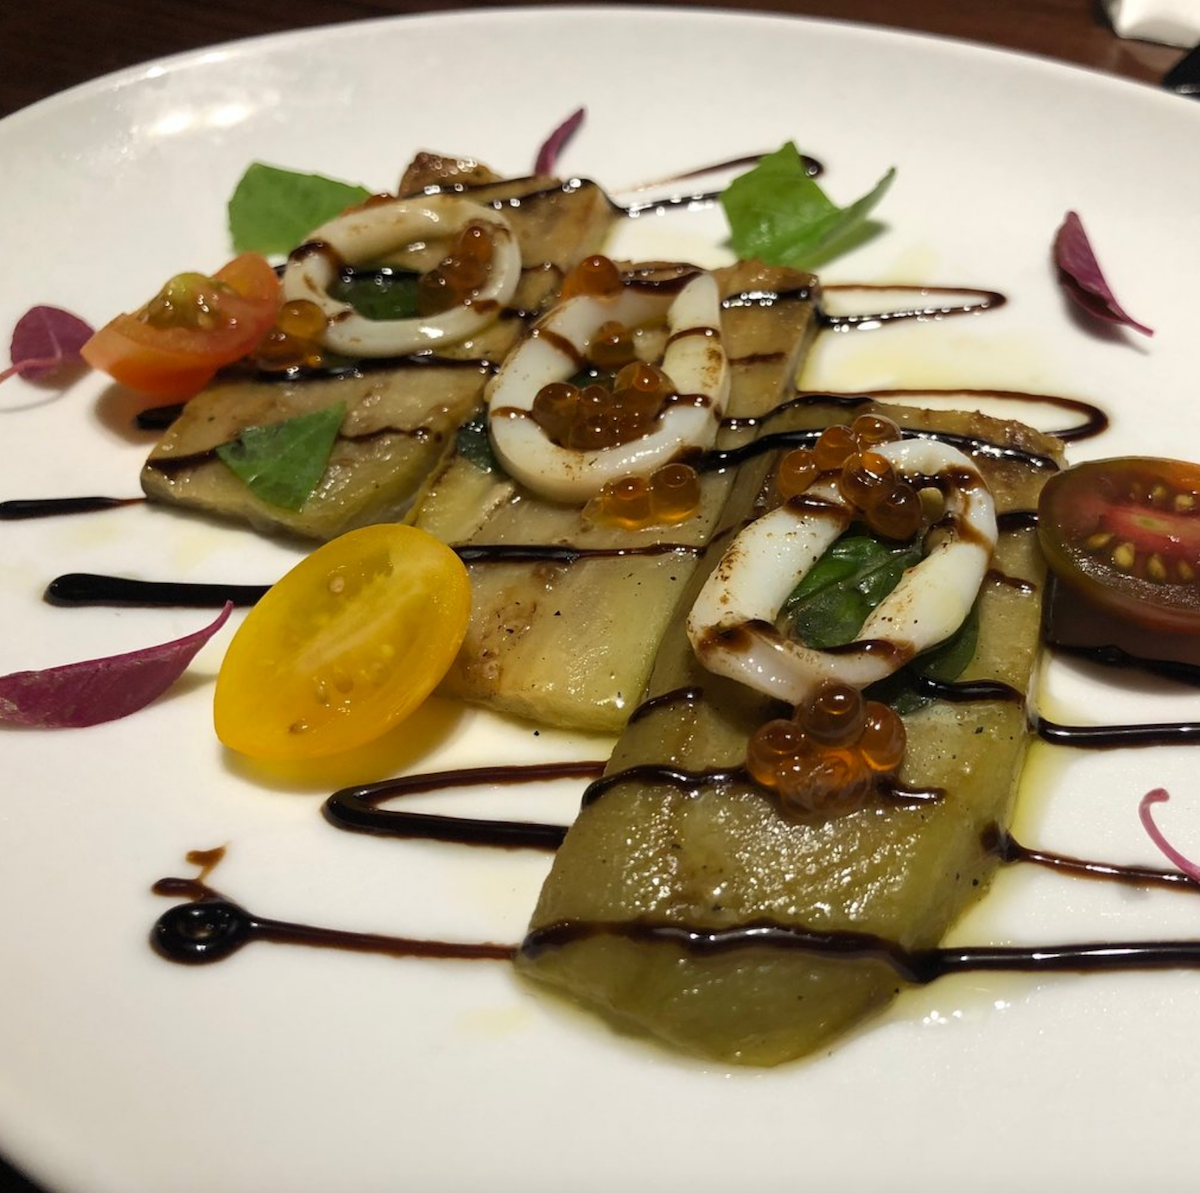 IL CORDA Charcoal Steakhouse squid